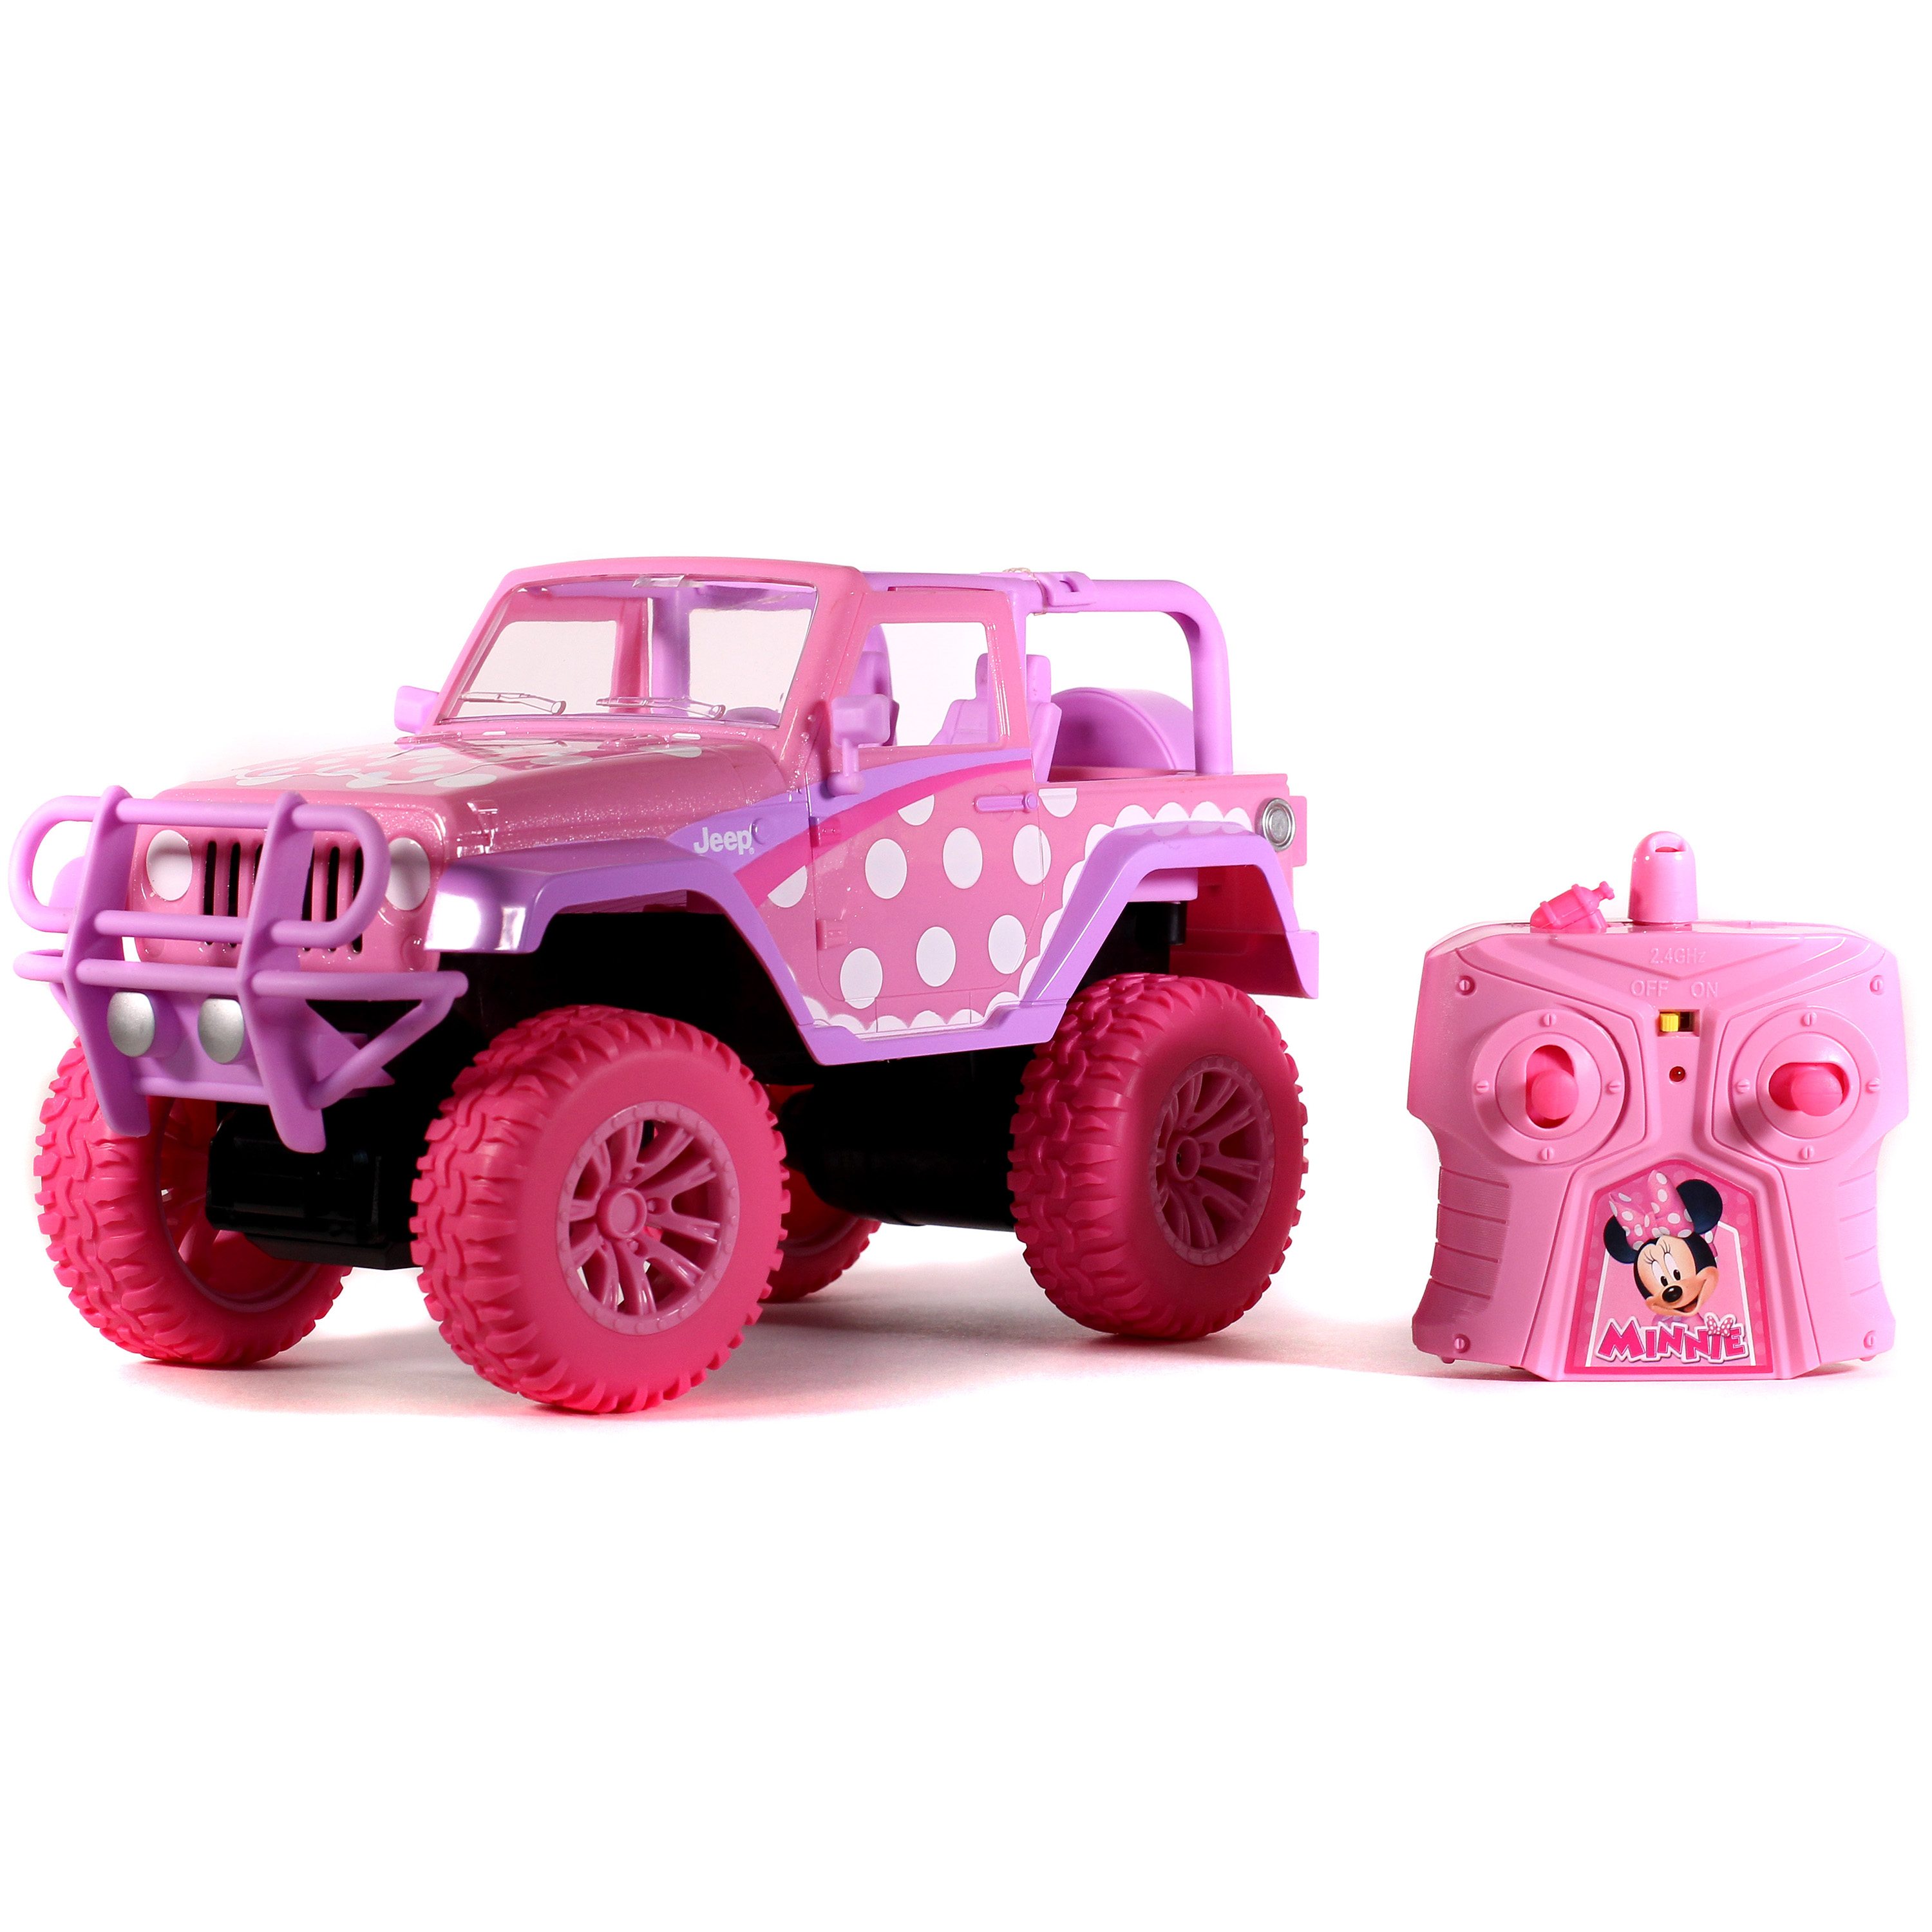 Jada Toys - Disney Minnie Mouse 1:16 Scale Jeep RC - image 1 of 6